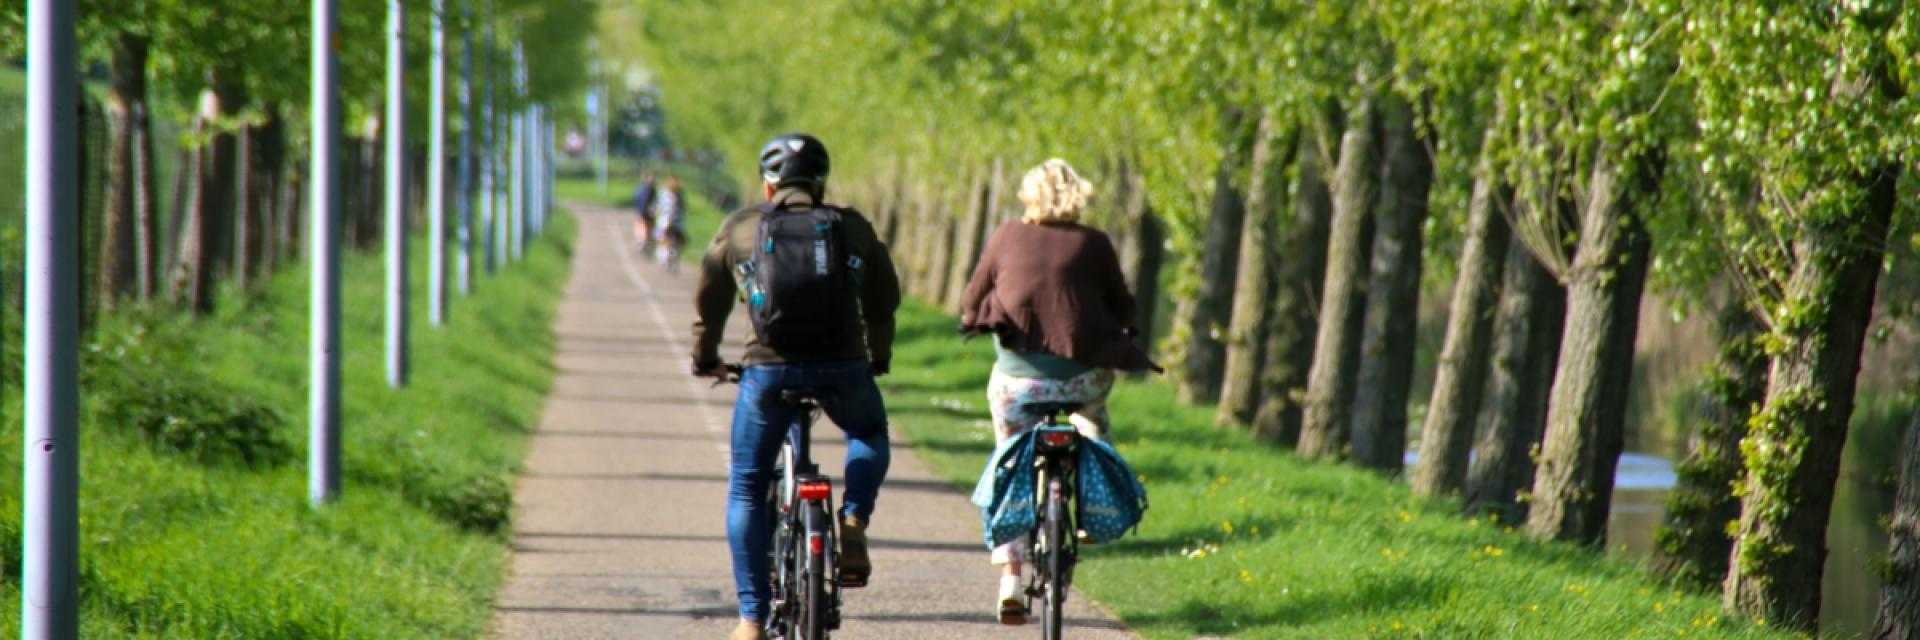 Cycling straight through the municipality of Haarlemmermeer.